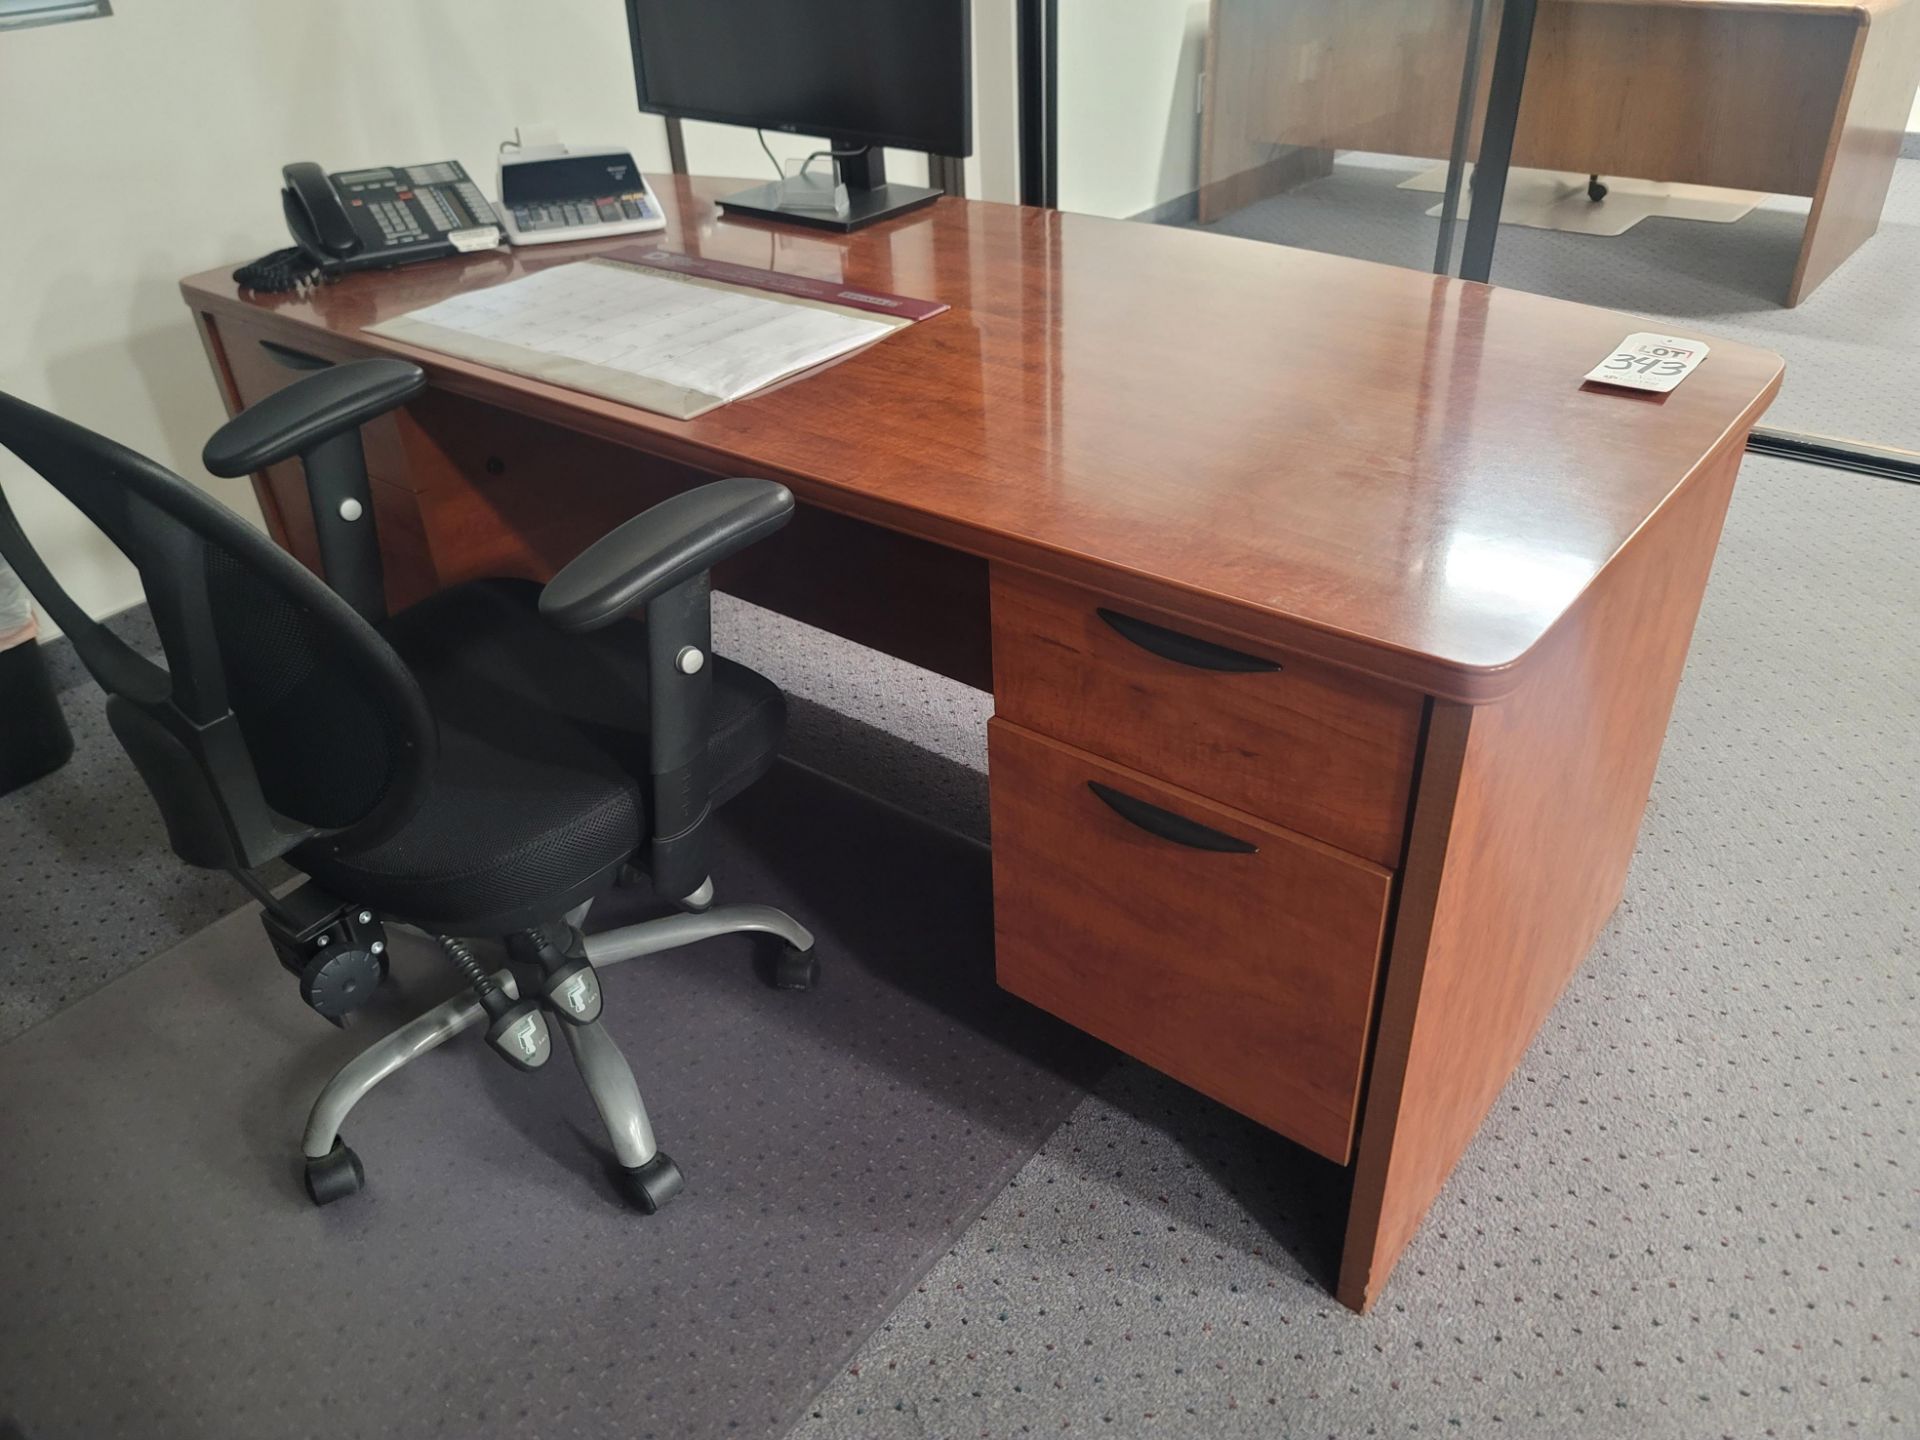 LOT - OFFICE DESK, 6' X 3', W/ CHAIR, CONTENTS NOT INCLUDED